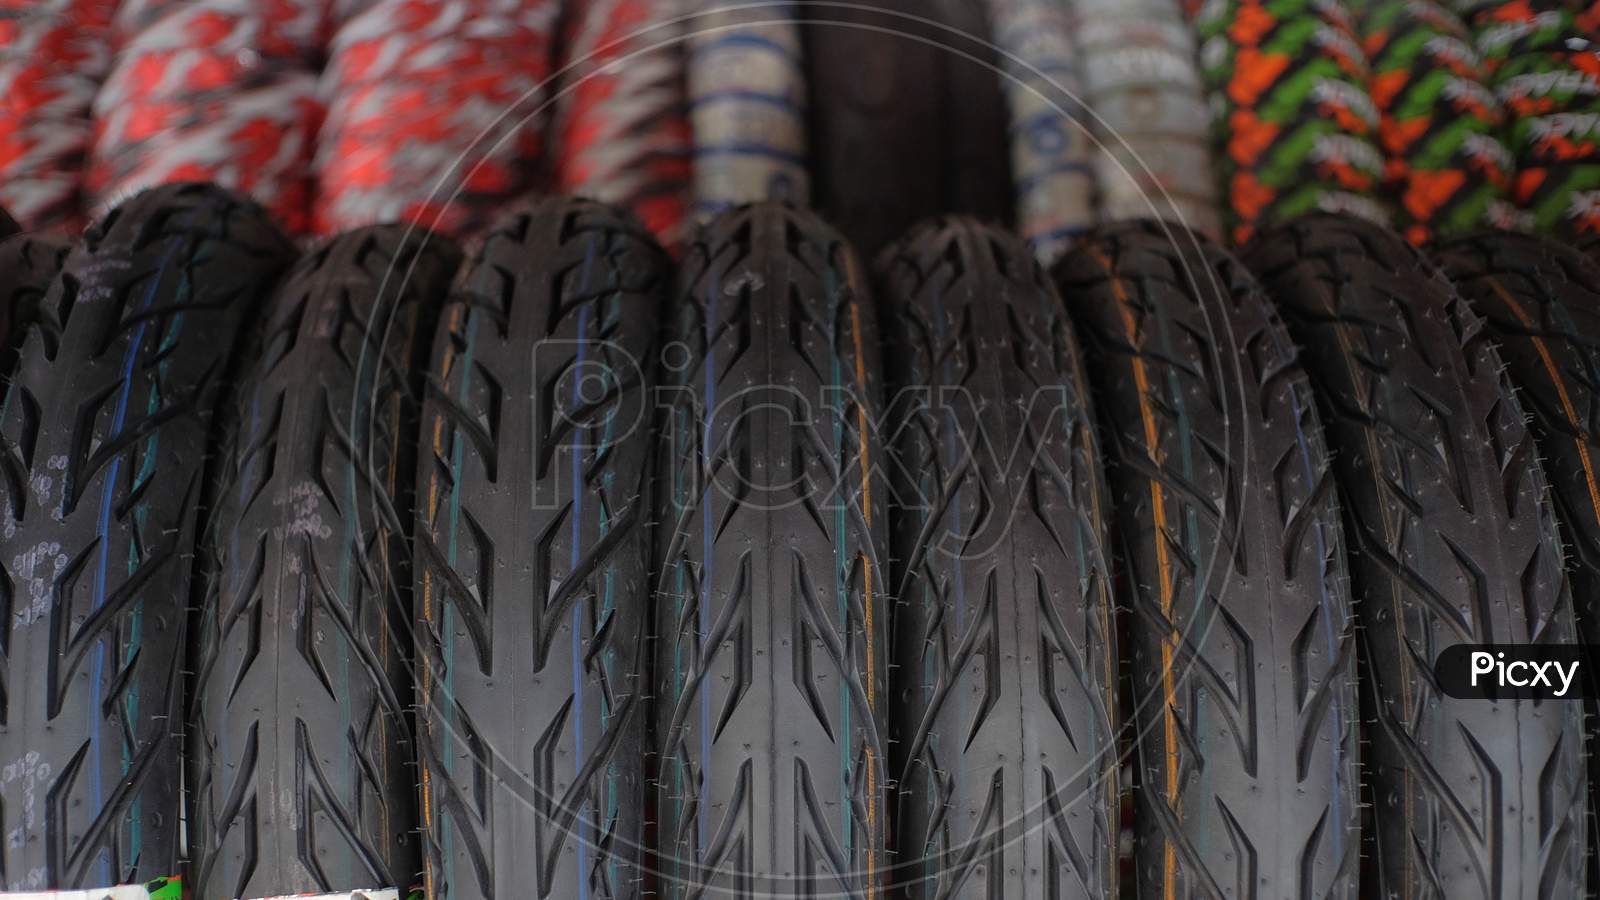 Motorcycle tires with a variety of motives